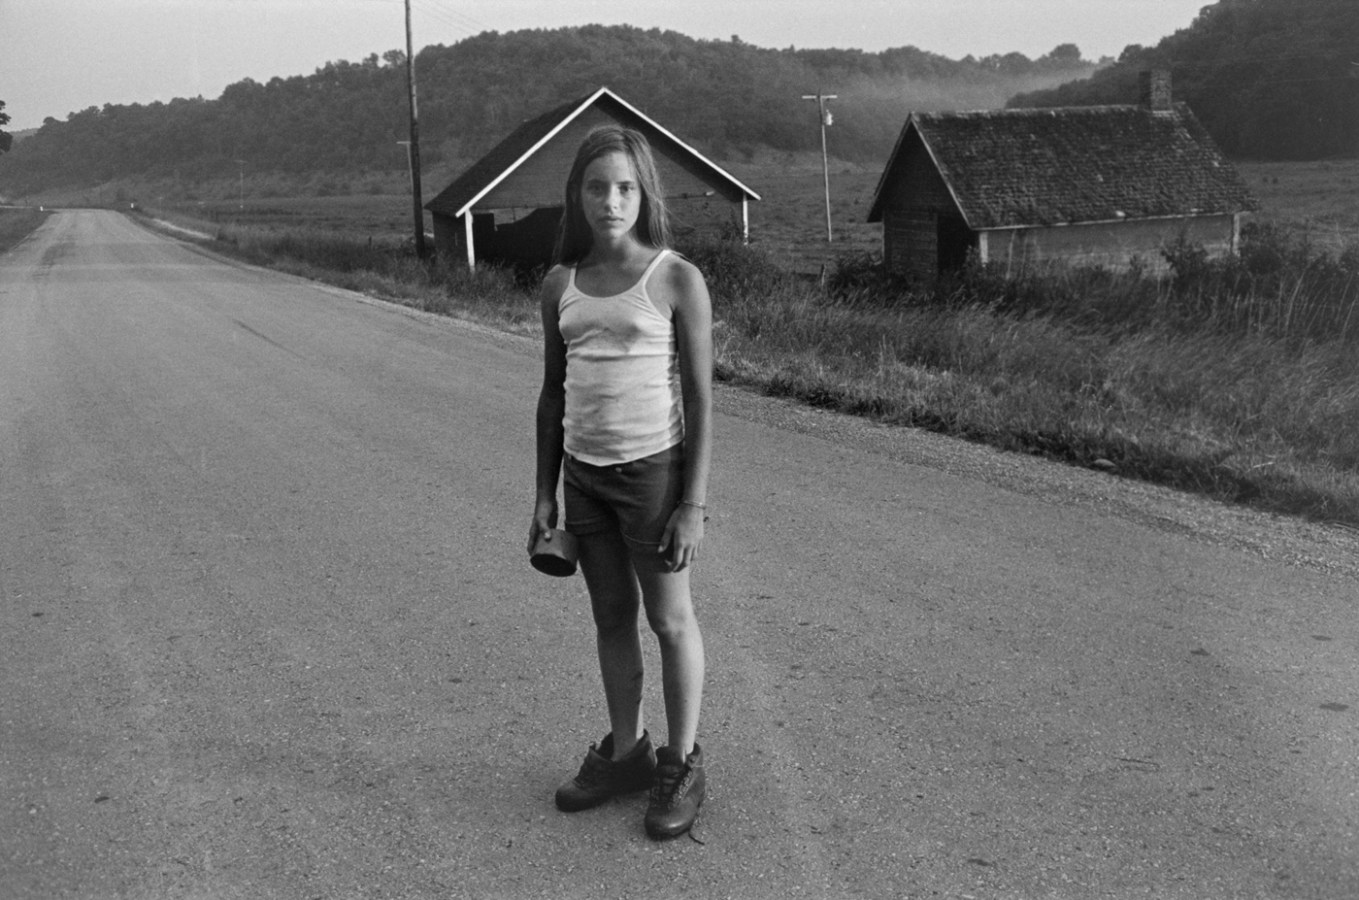 Black-and-white photograph of a girl standing in a dirt road with her head framed by a building in the background